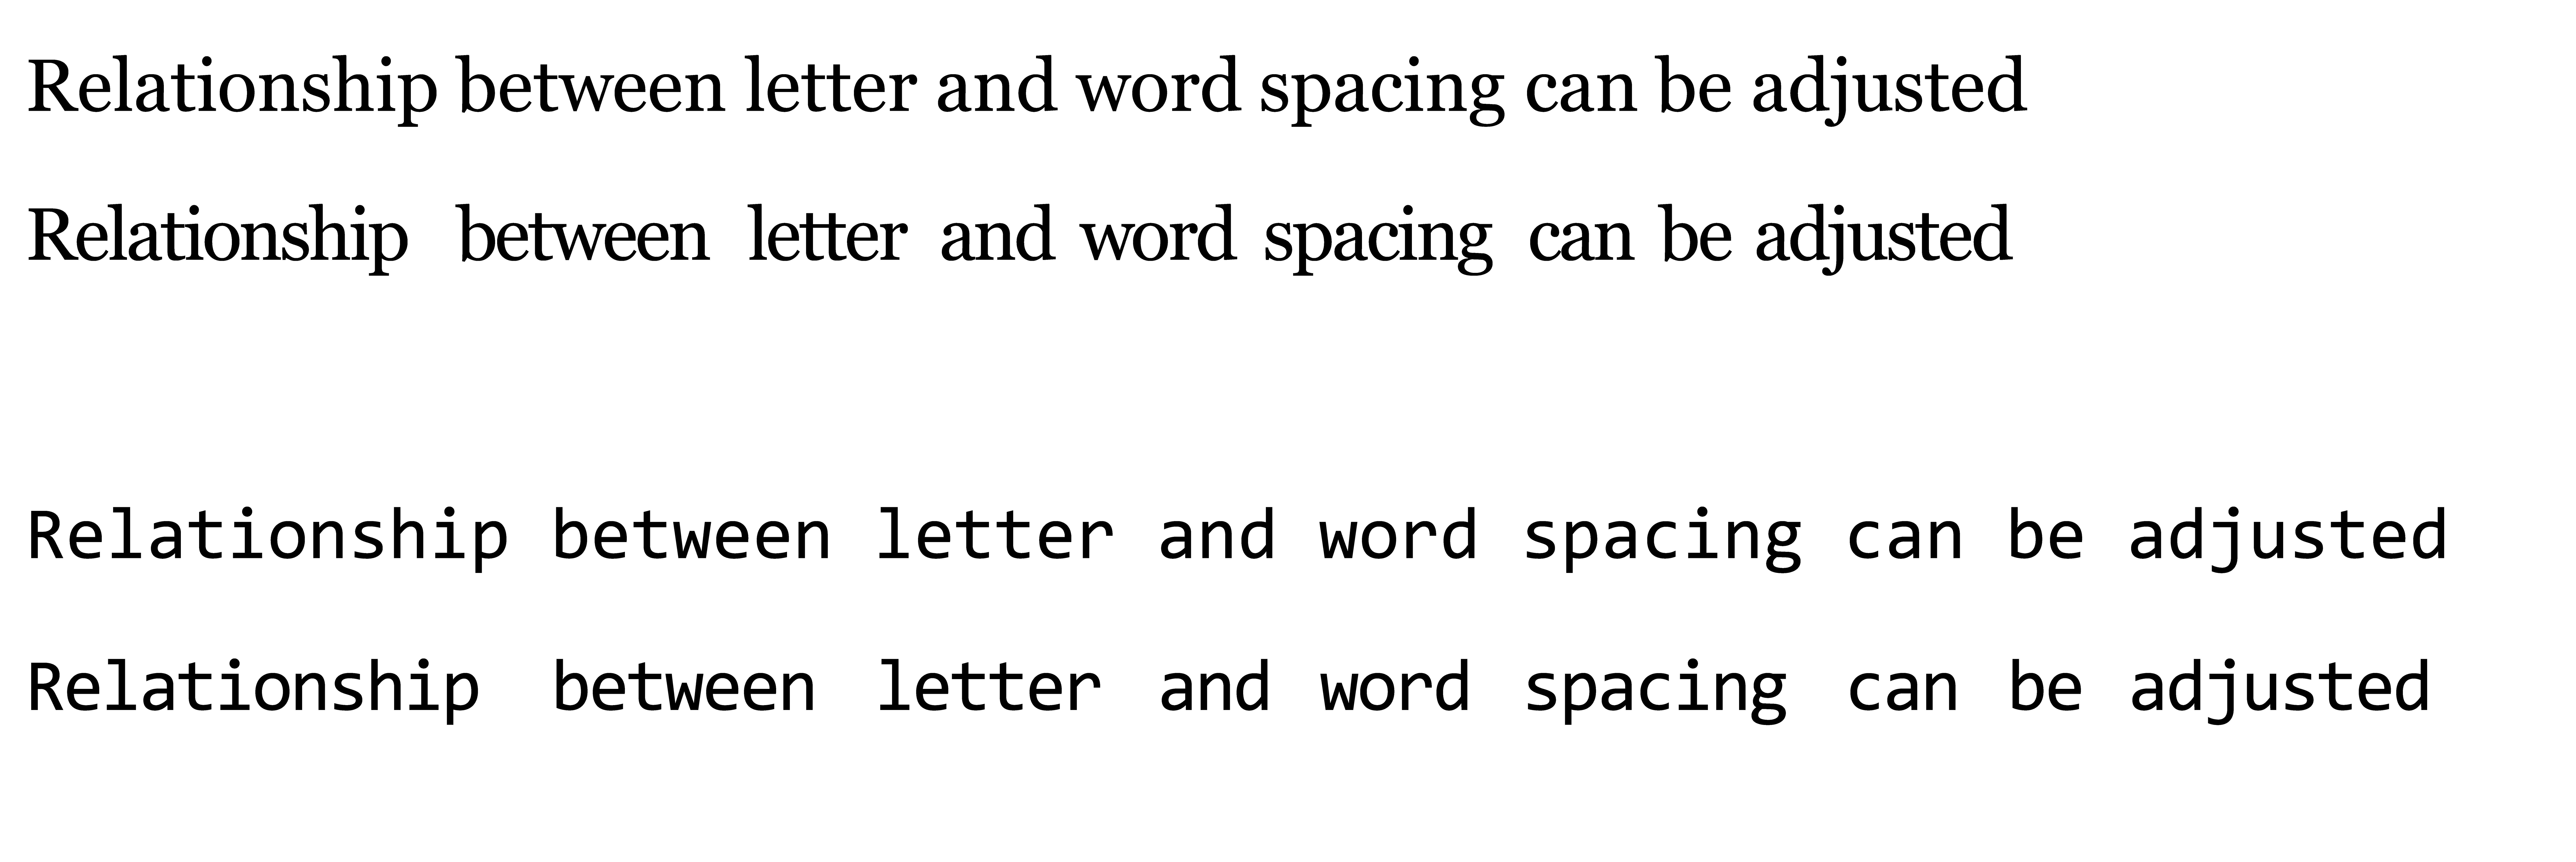 Relationship between letter and word spacing